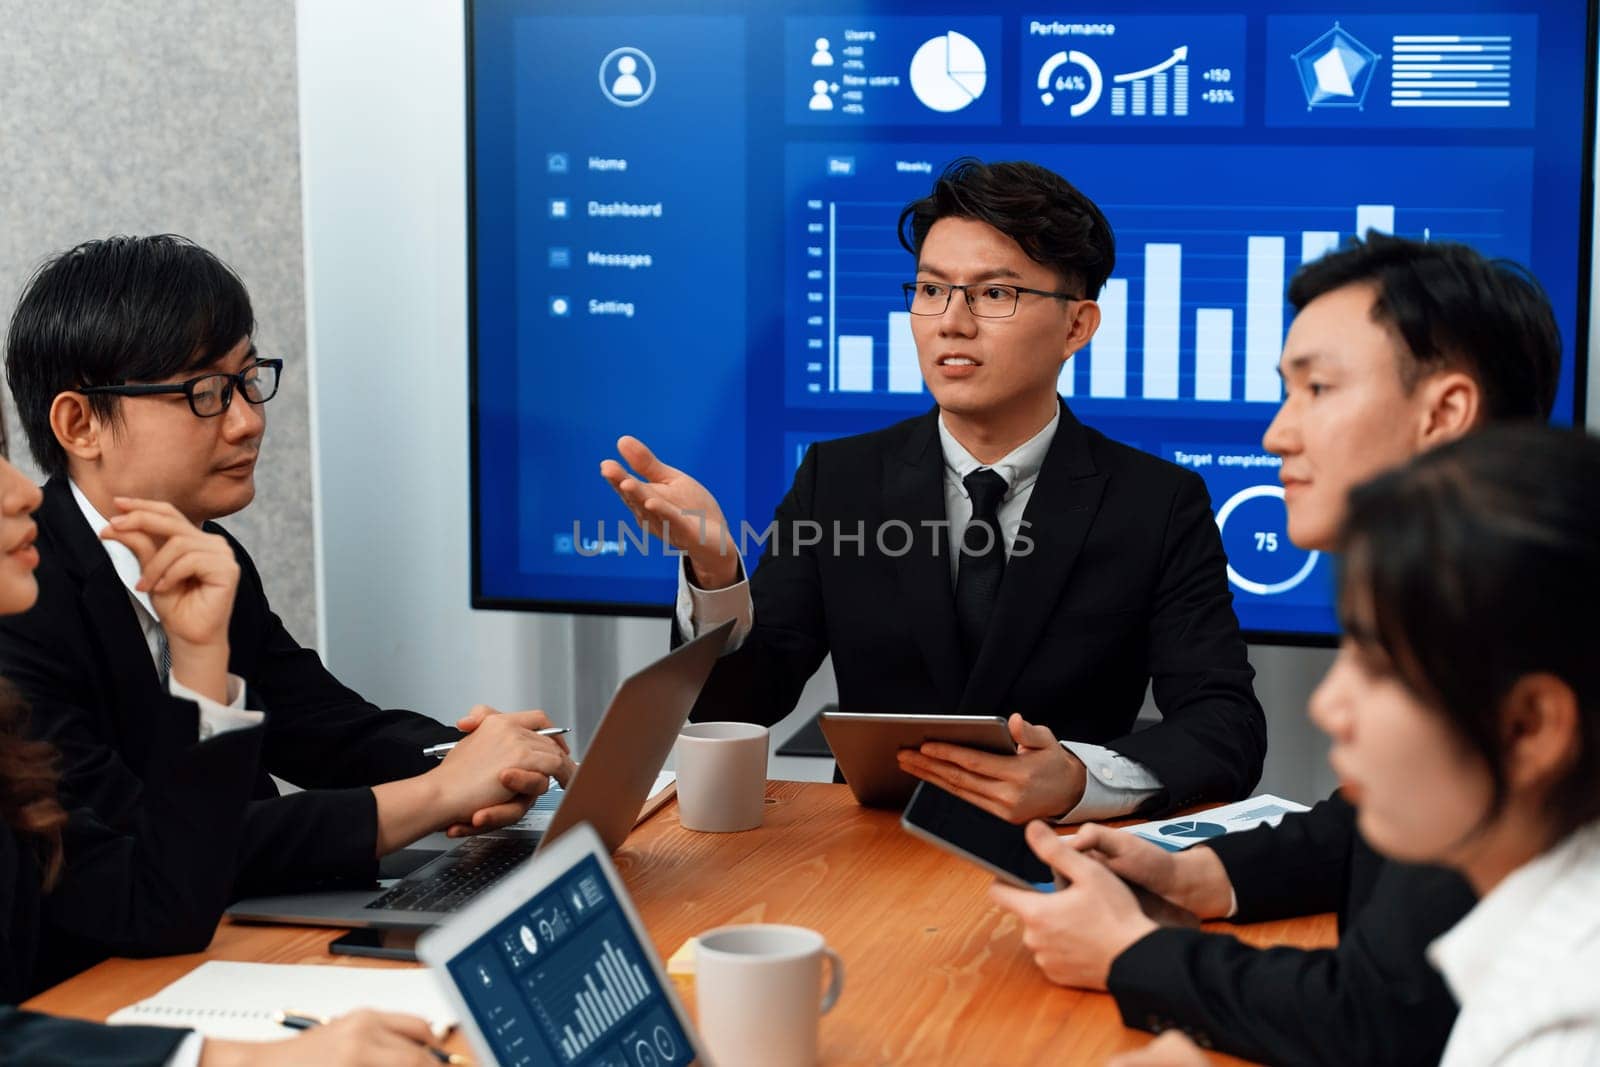 Business team of financial data analysis meeting with business intelligence, report paper and dashboard on laptop for marketing strategy. Business people working together to promote harmony in office.